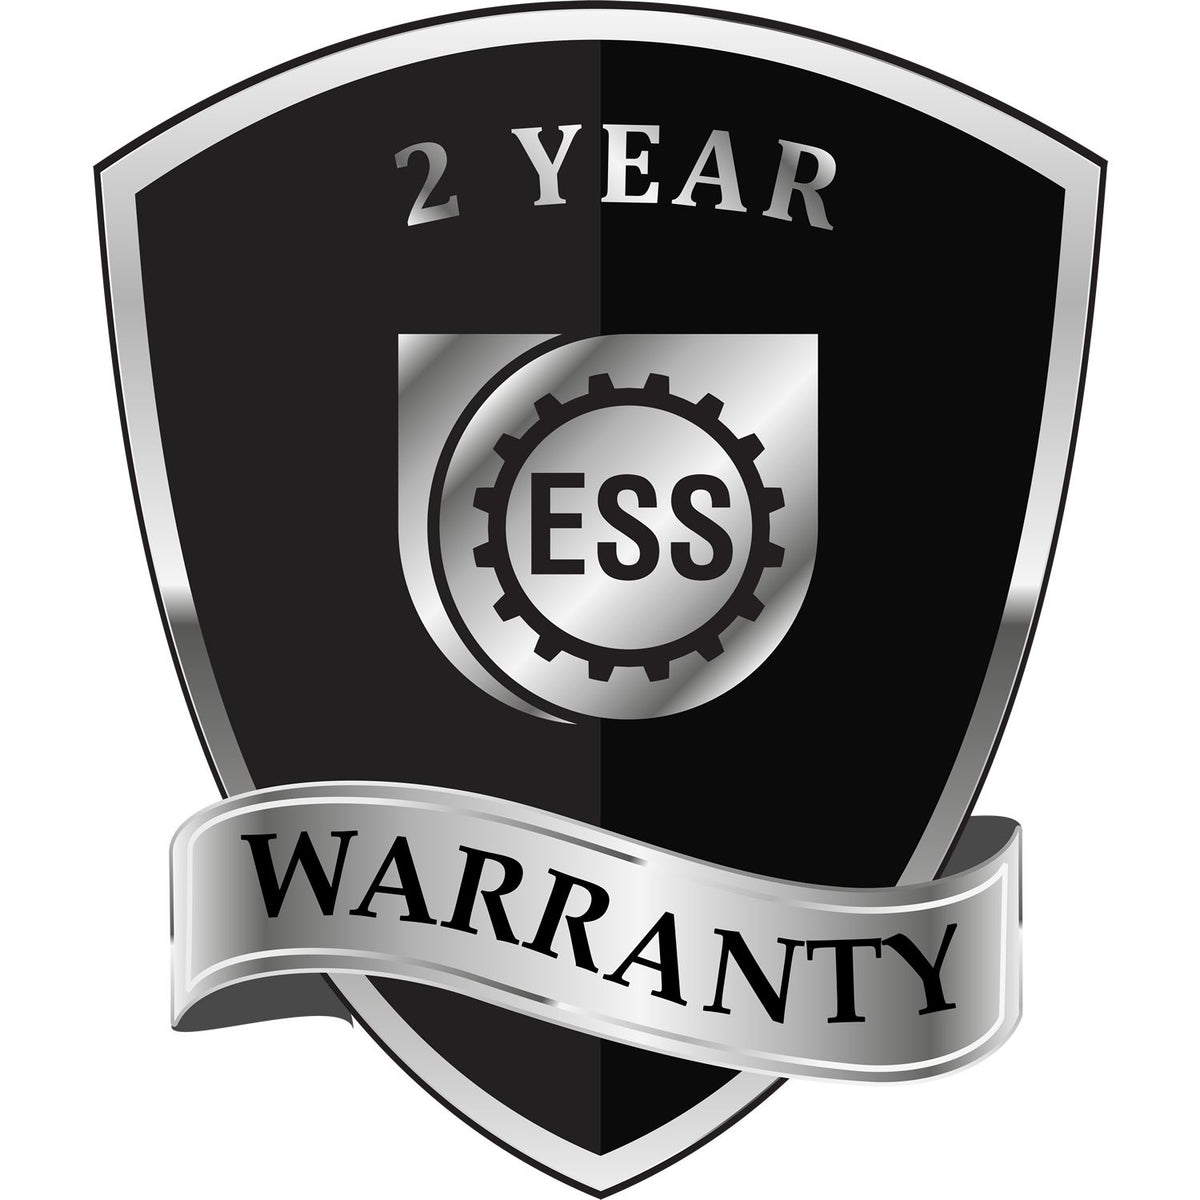 A black and silver badge or emblem showing warranty information for the Hybrid Iowa Geologist Seal